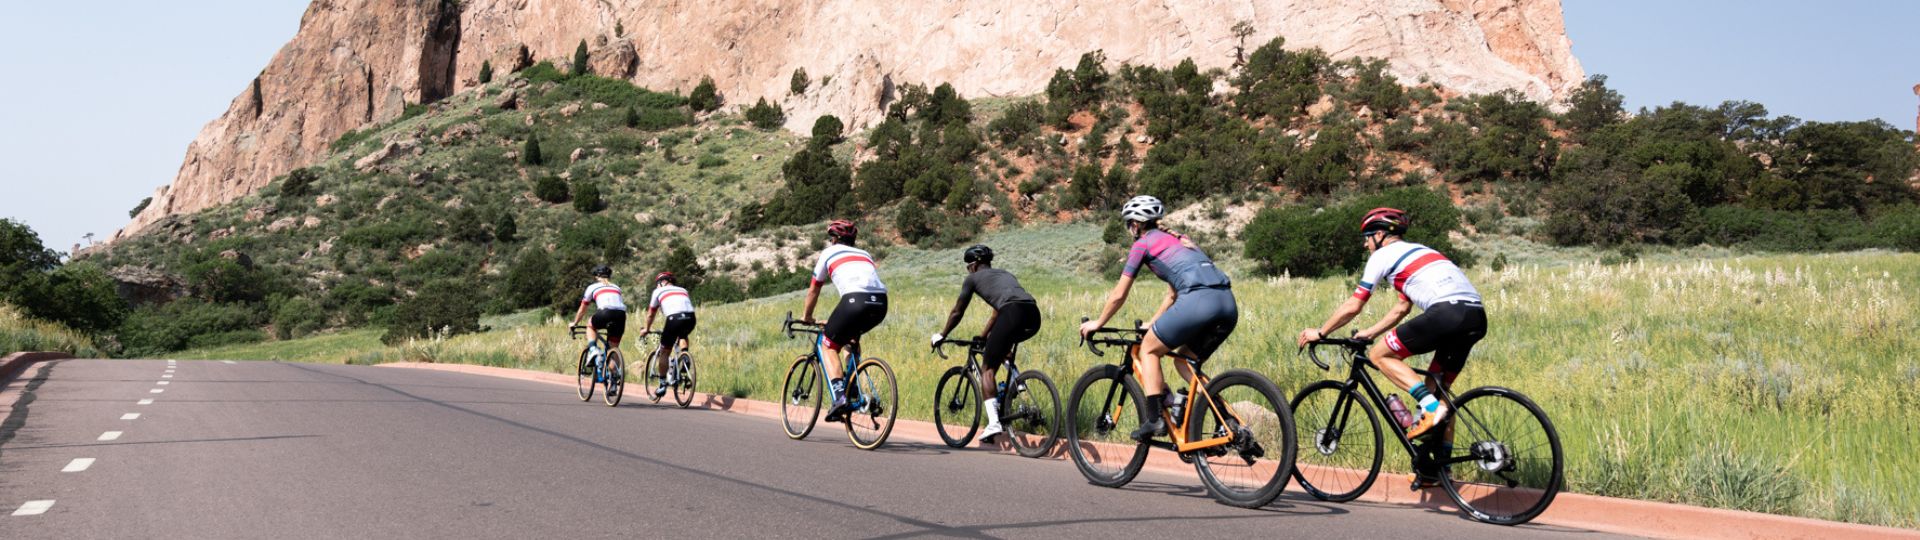 pikes peak cycling camp